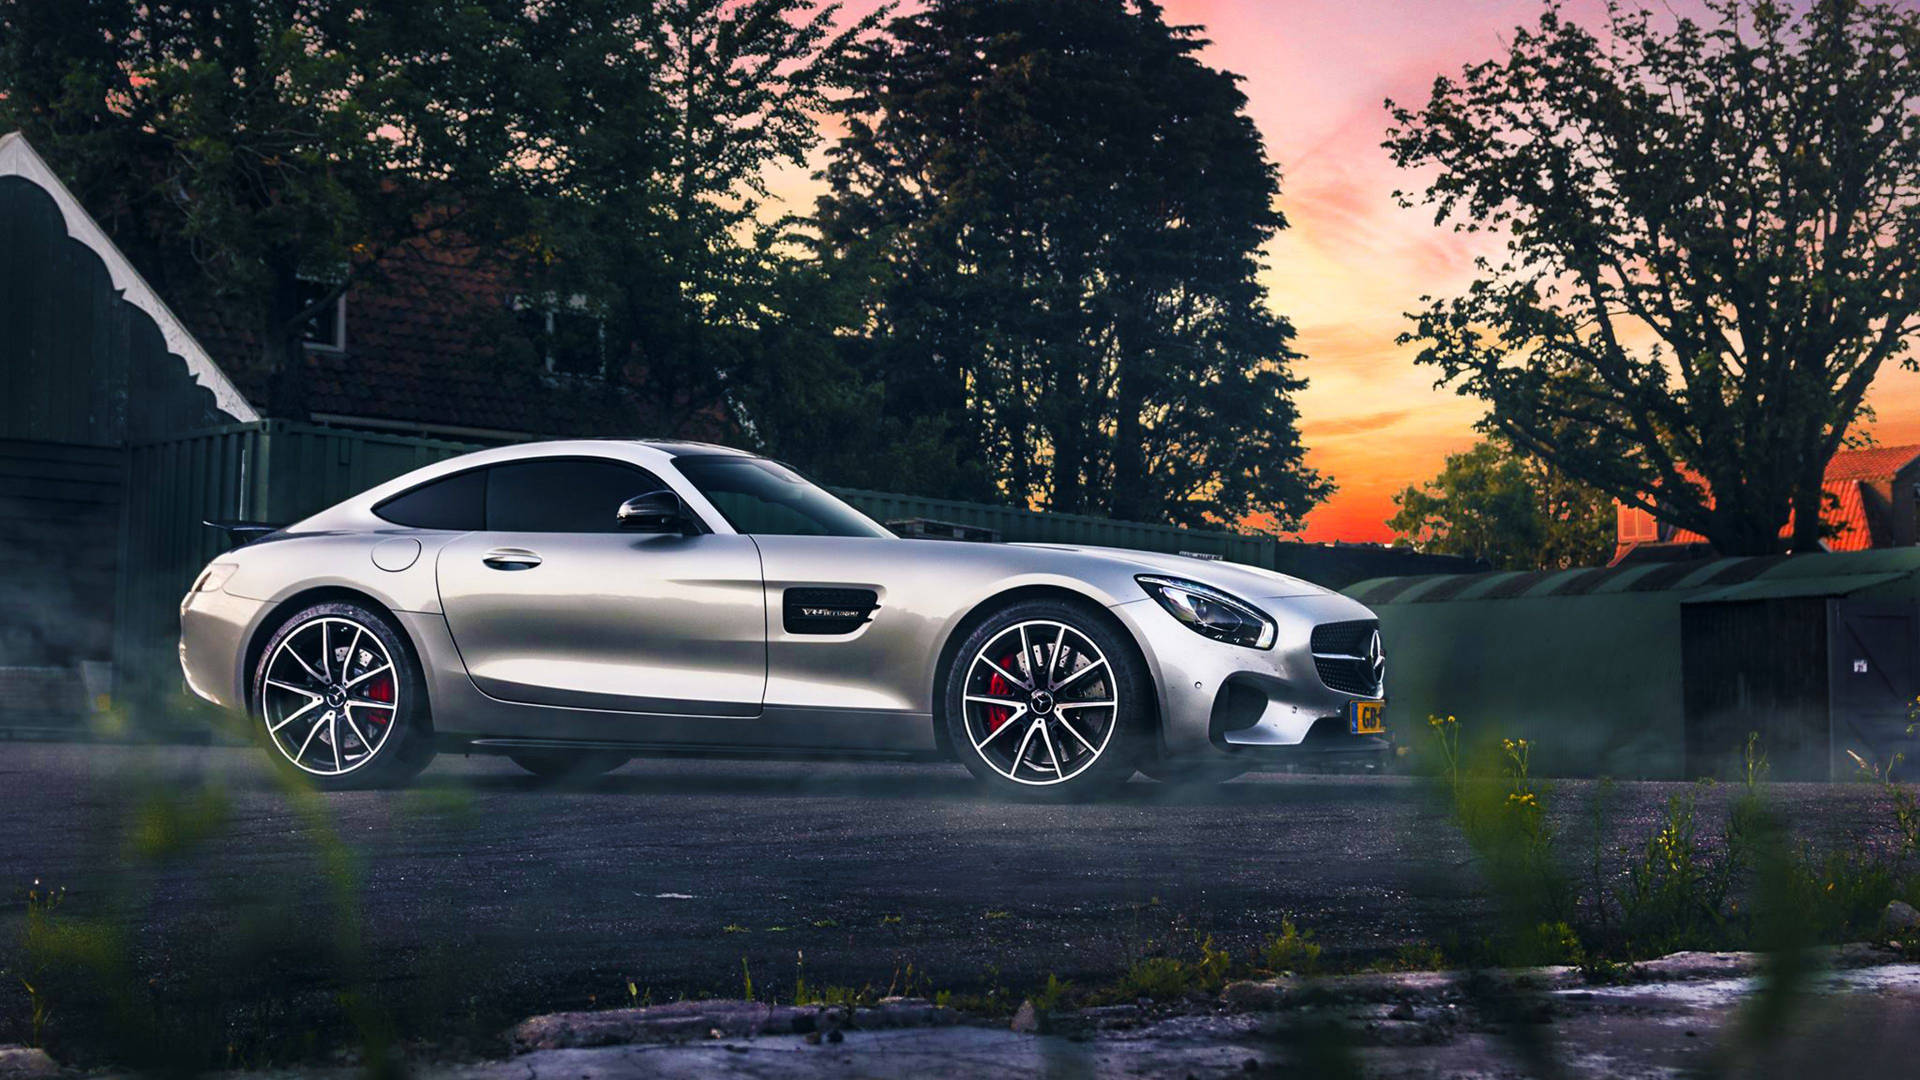 Sunset And AMG GT R Wallpaper